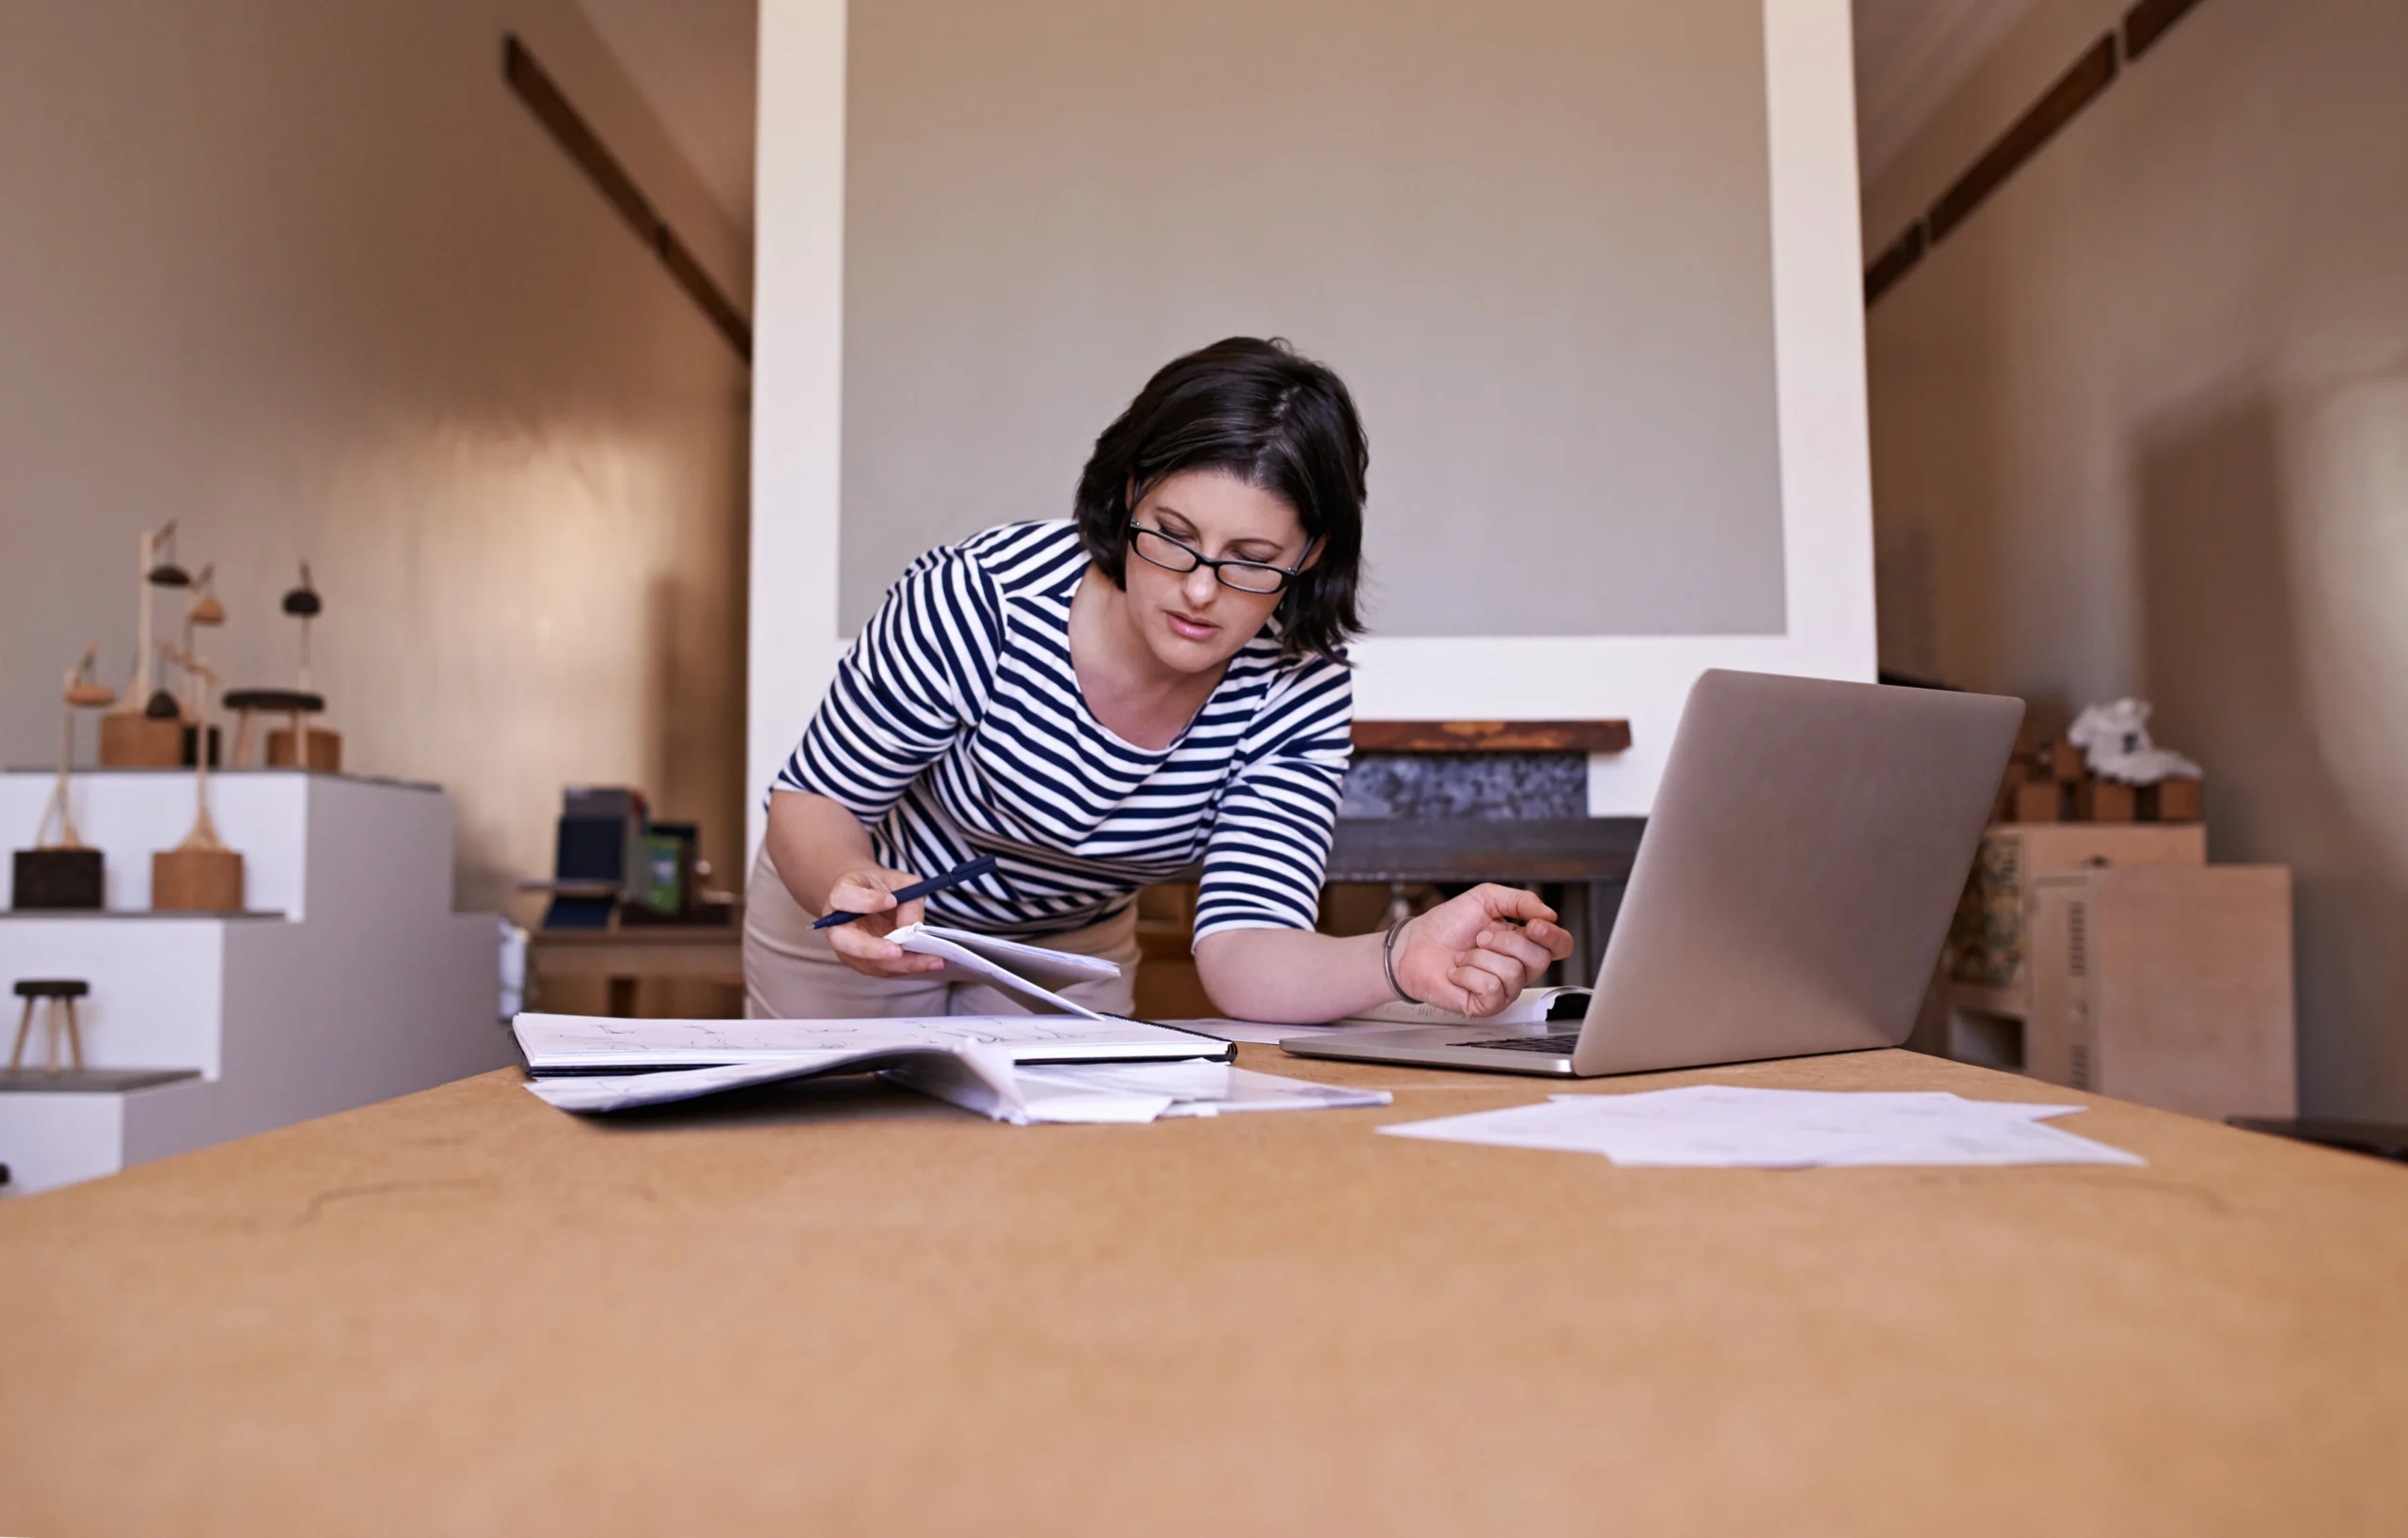 Woman with dark shoulder length hair, wearing a white and black t-shirt and black rimmed glasses is leaning over her desk with paperwork and laptop preparing overdue tax returns